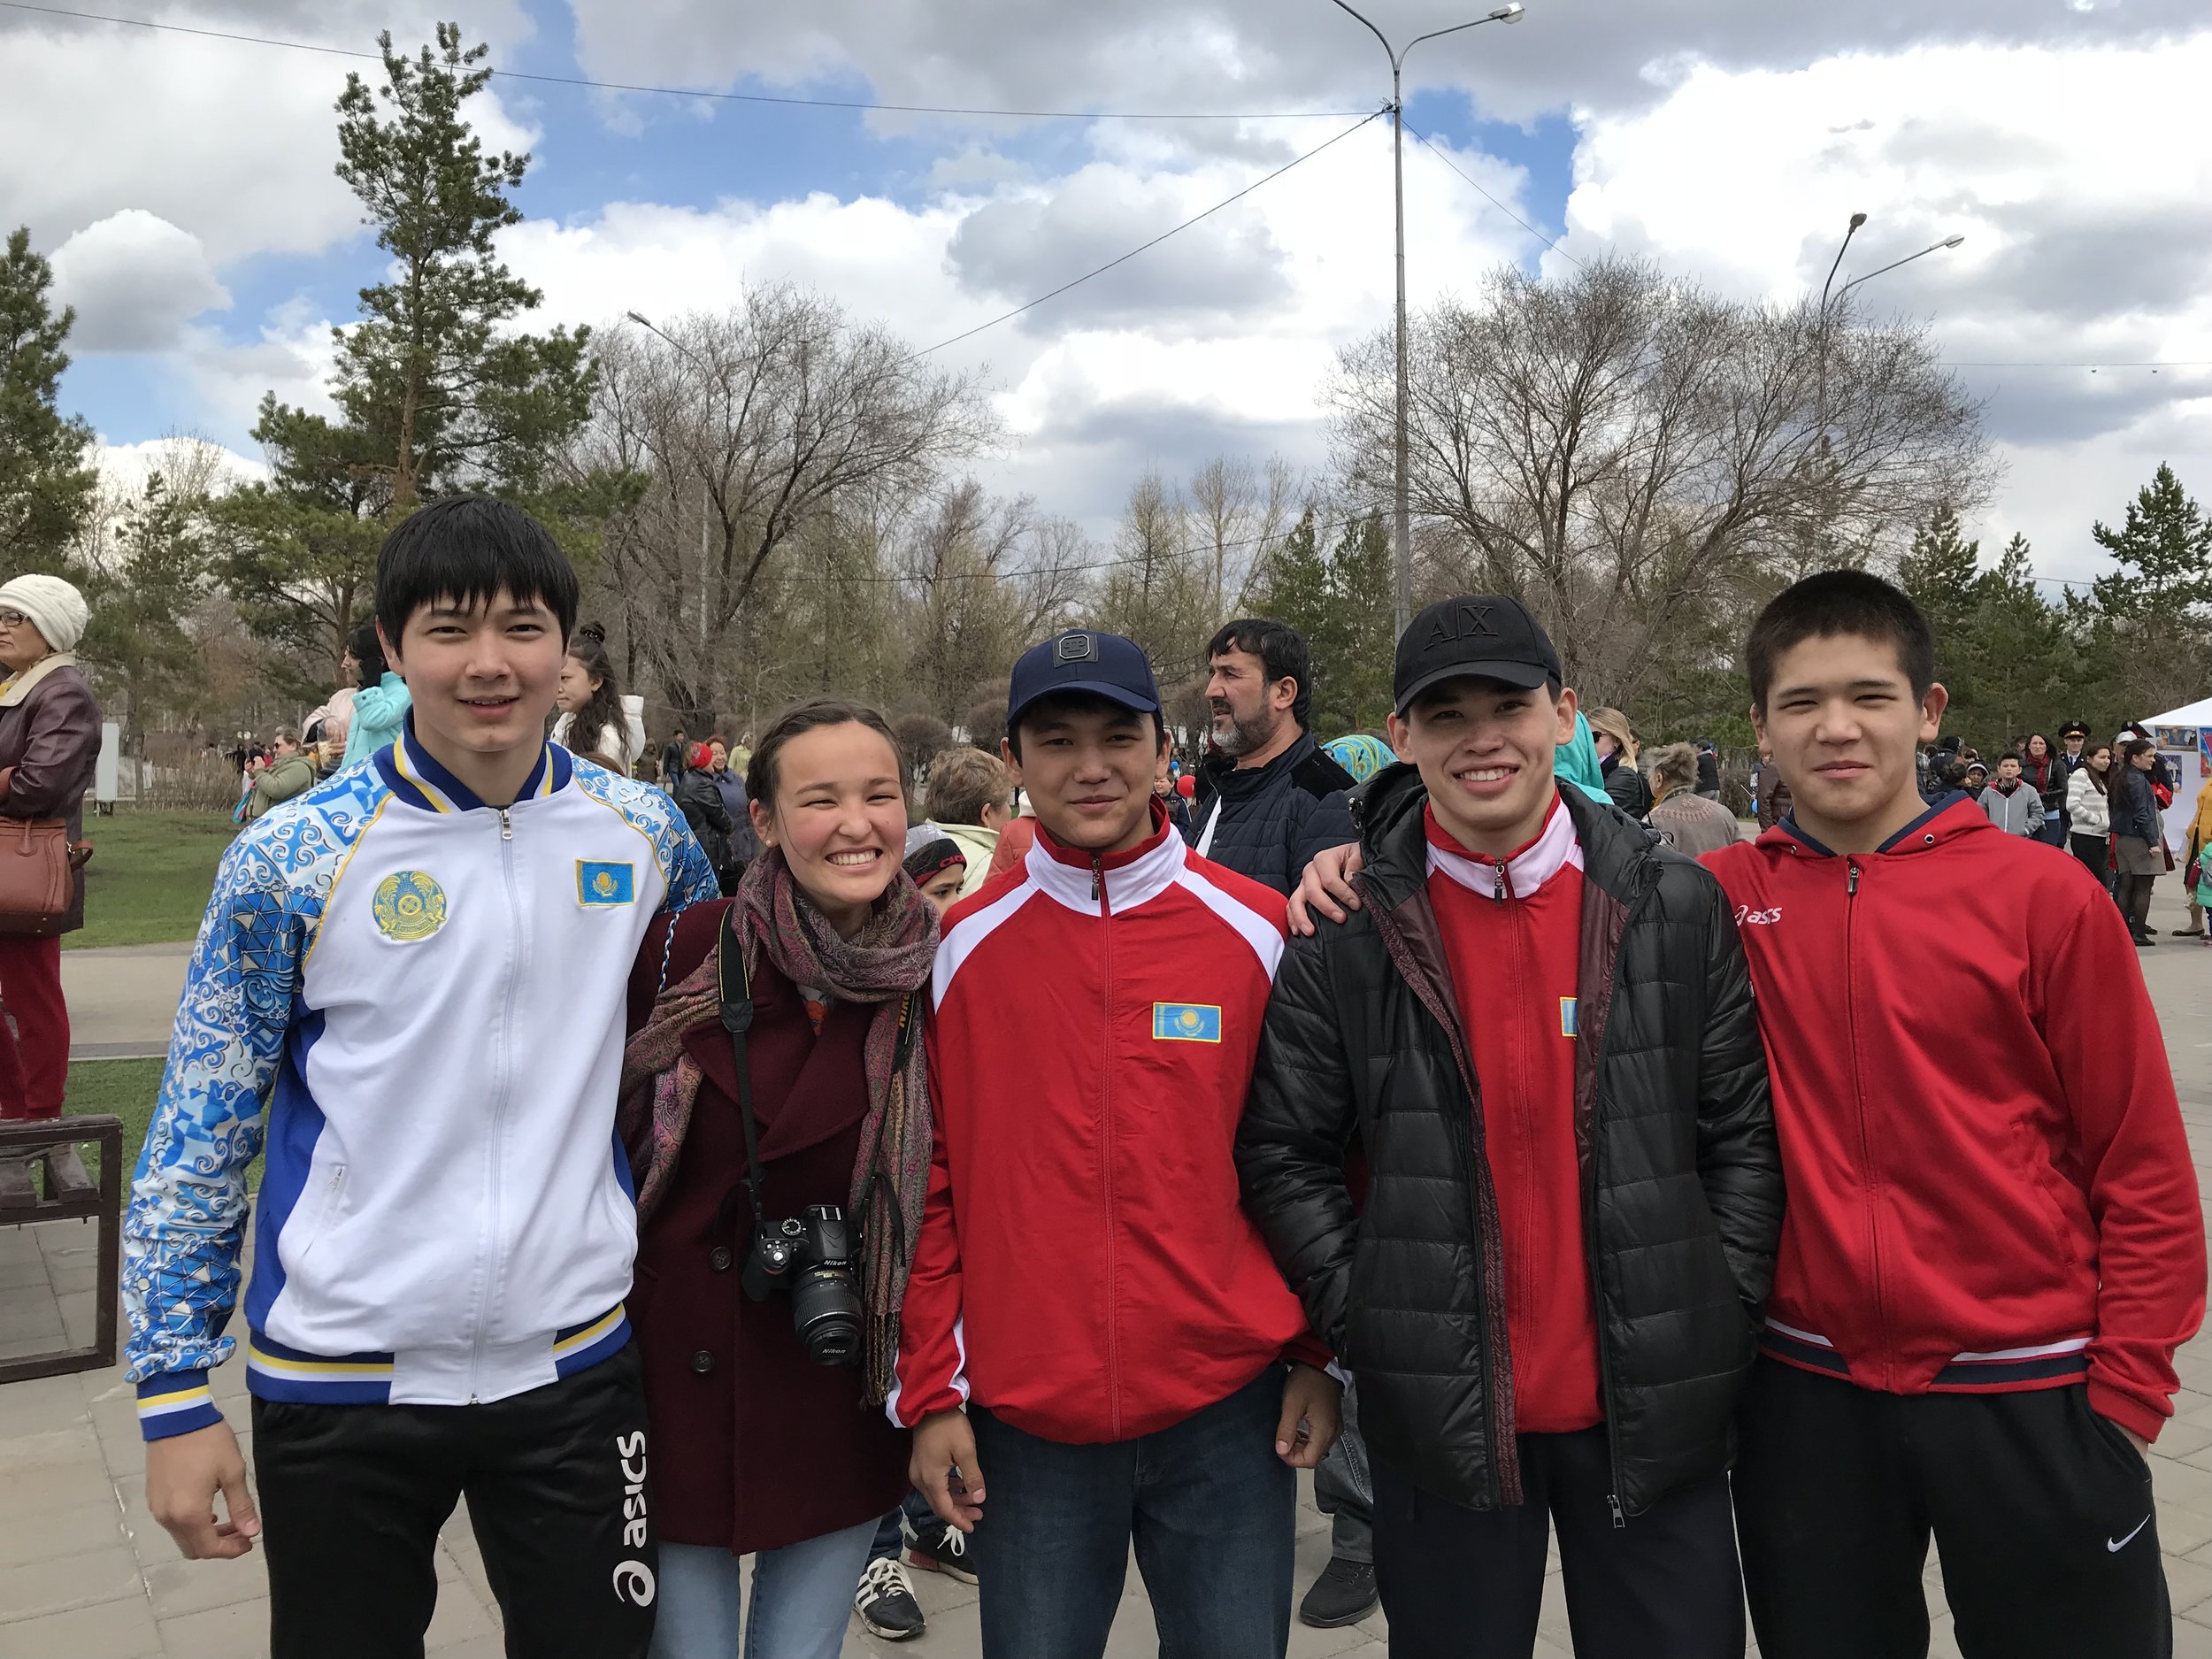 Picture with Kazakh people, they are so nice!